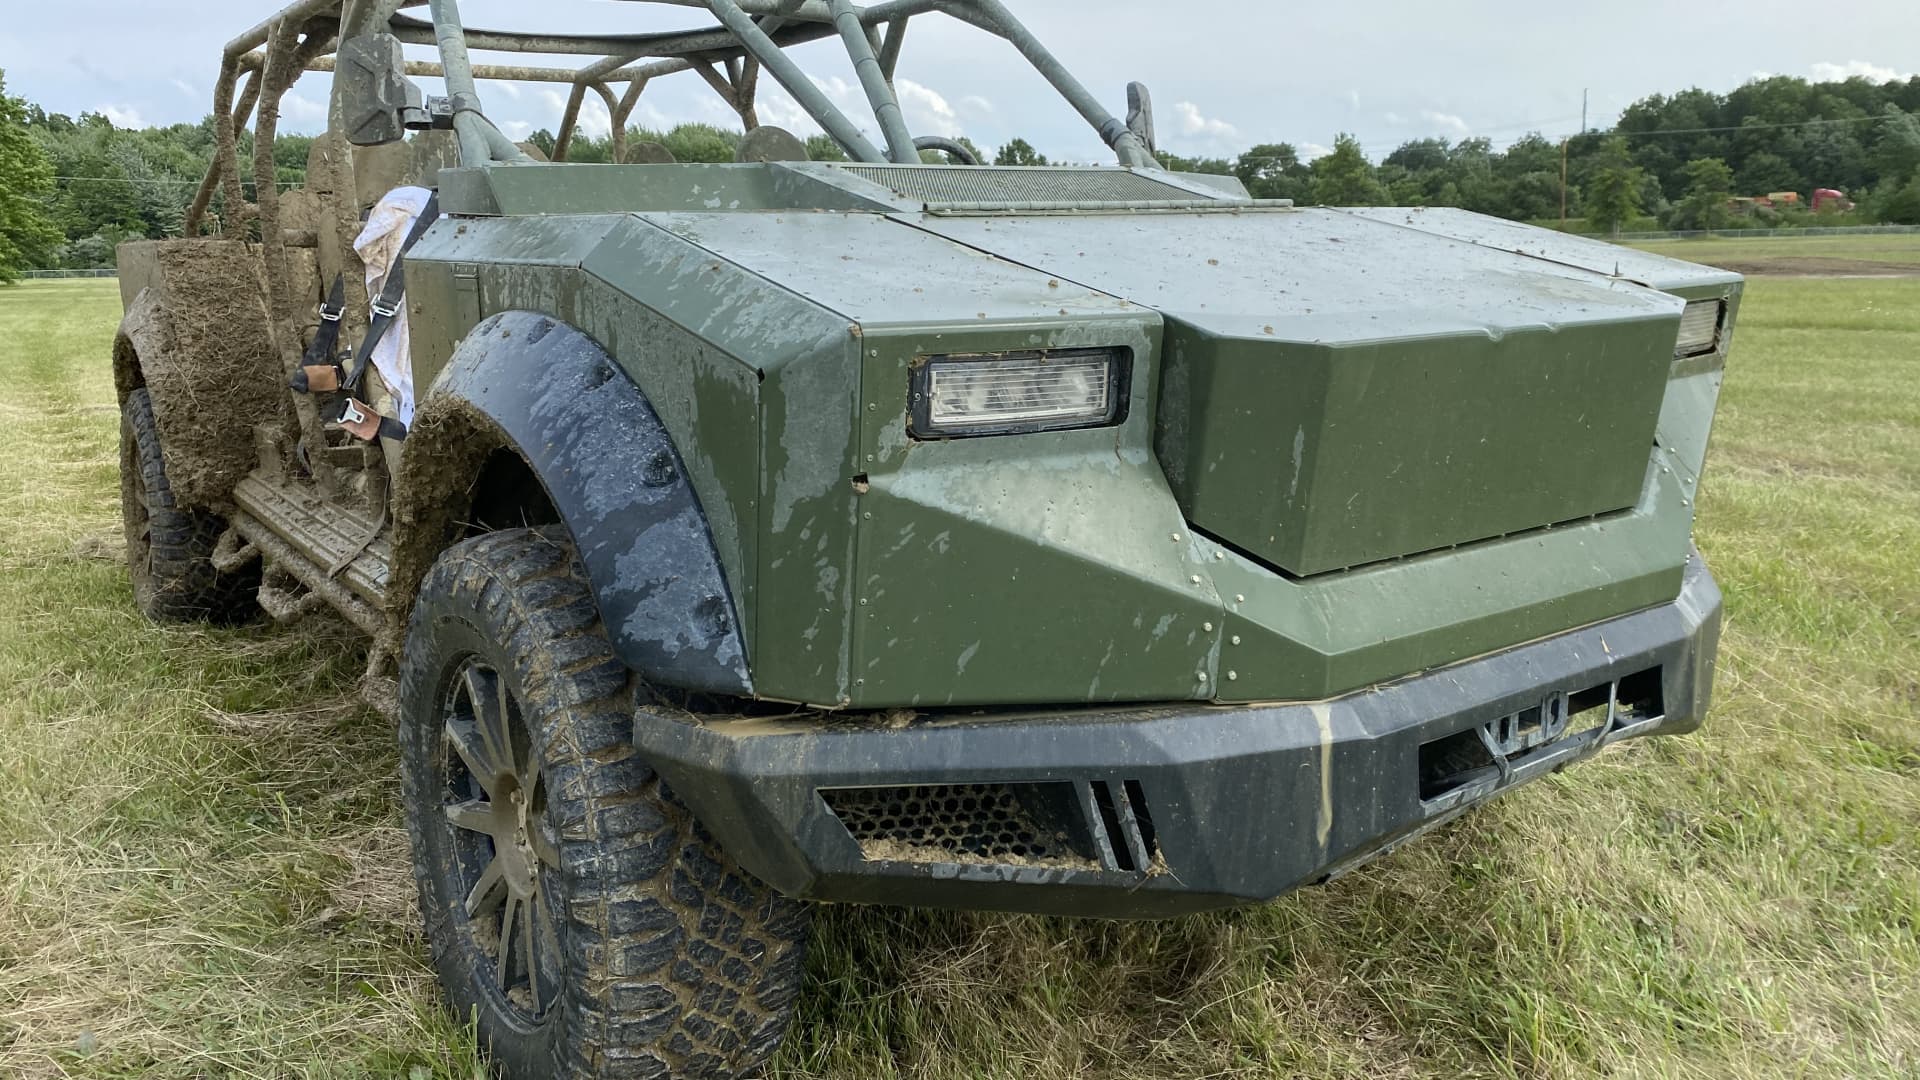 Lordstown Motors has developed this electric vehicle based on the platform of its Endurance pickup truck for military applications, according to the company.